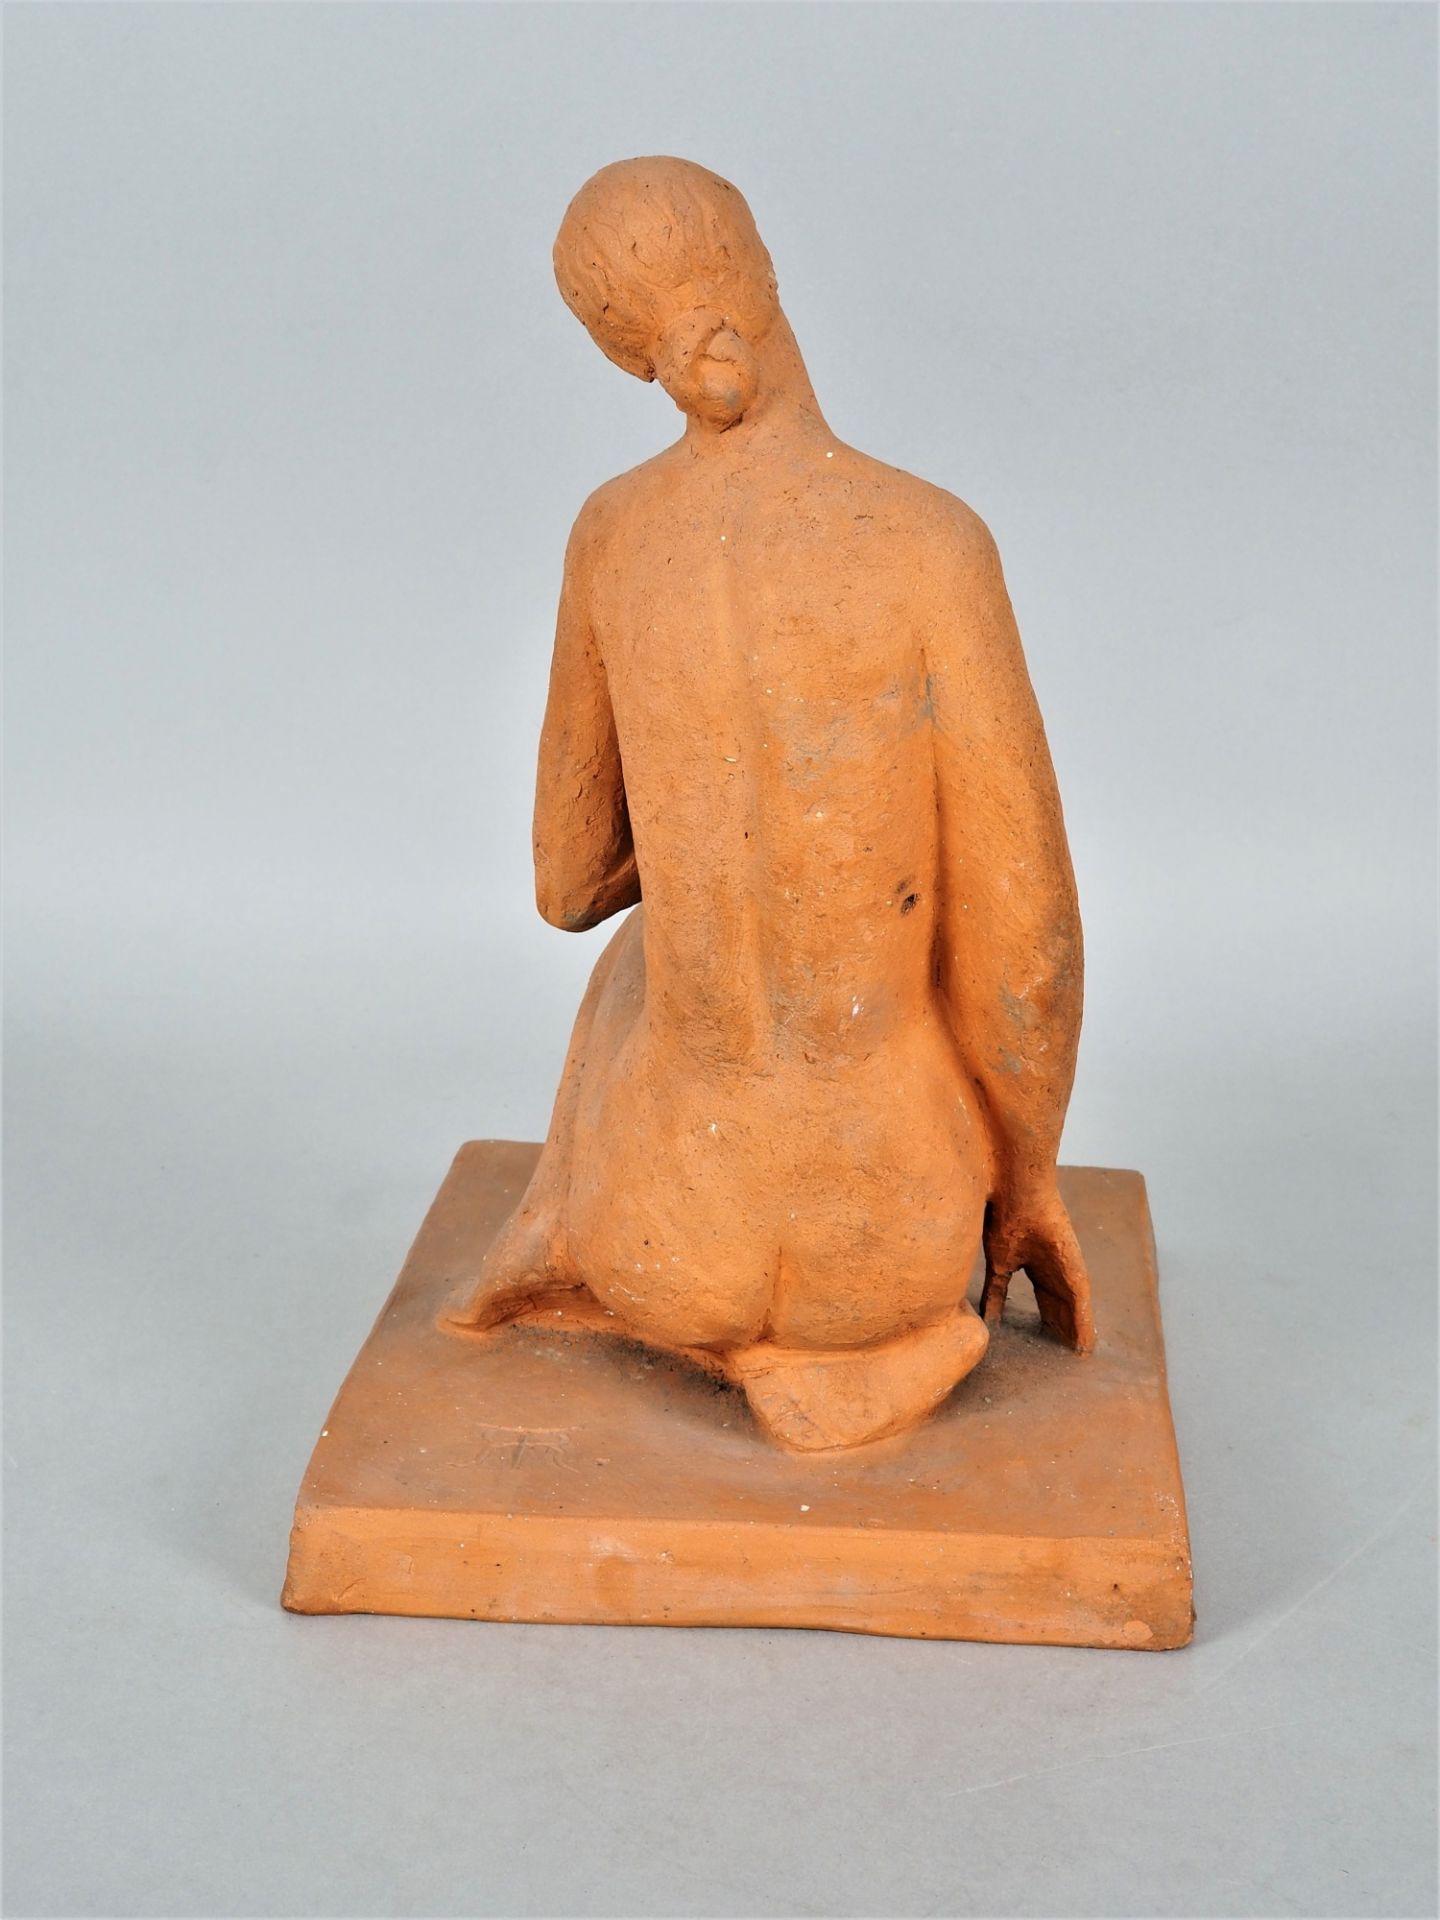 Michael Rauscher (1875, Traberg - 1915, Húszt) - clay sculpture of a female nude. - Image 3 of 5